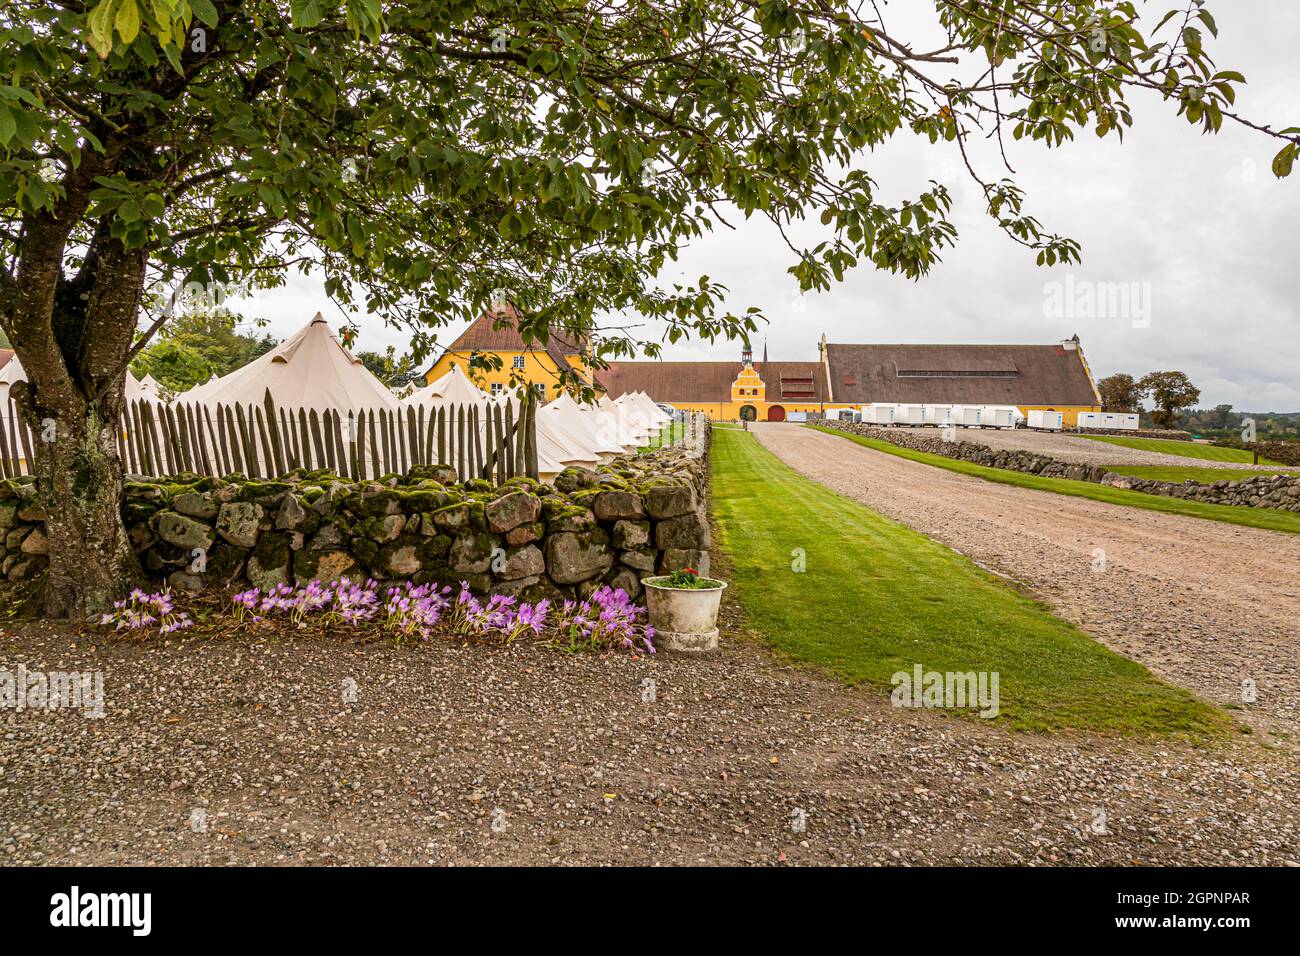 Festival in glamping tents at Brahetrolleborg Castle Skov and Landbrug near Faaborg-Midtfyn, Denmark. The audience has been invited by three big Danish Companies. The public had no access to the three closed events in September 2021. Stock Photo